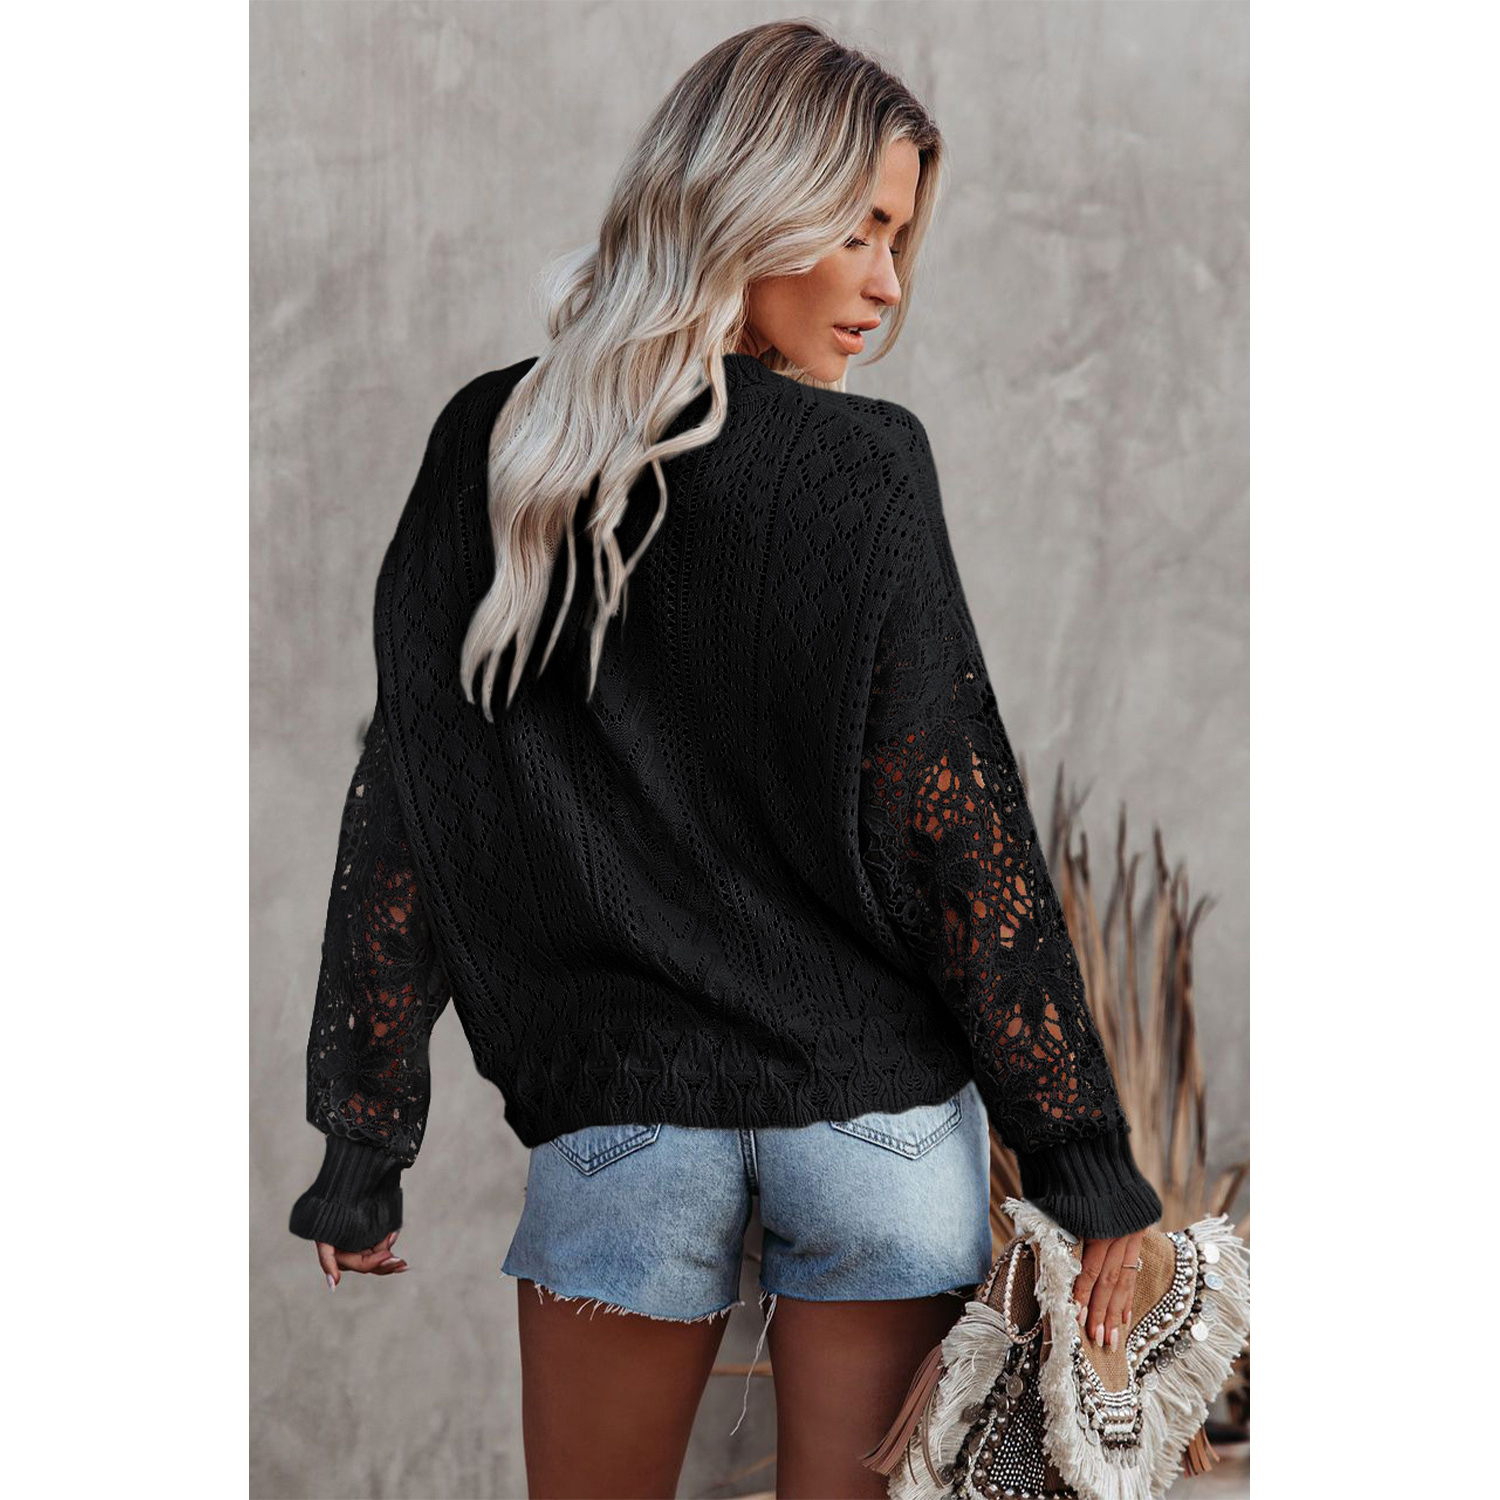 Lace Eyelet Knit Sweater, Casual Crew Neck Long Sleeve Sweater, Women's Clothing - Black, L